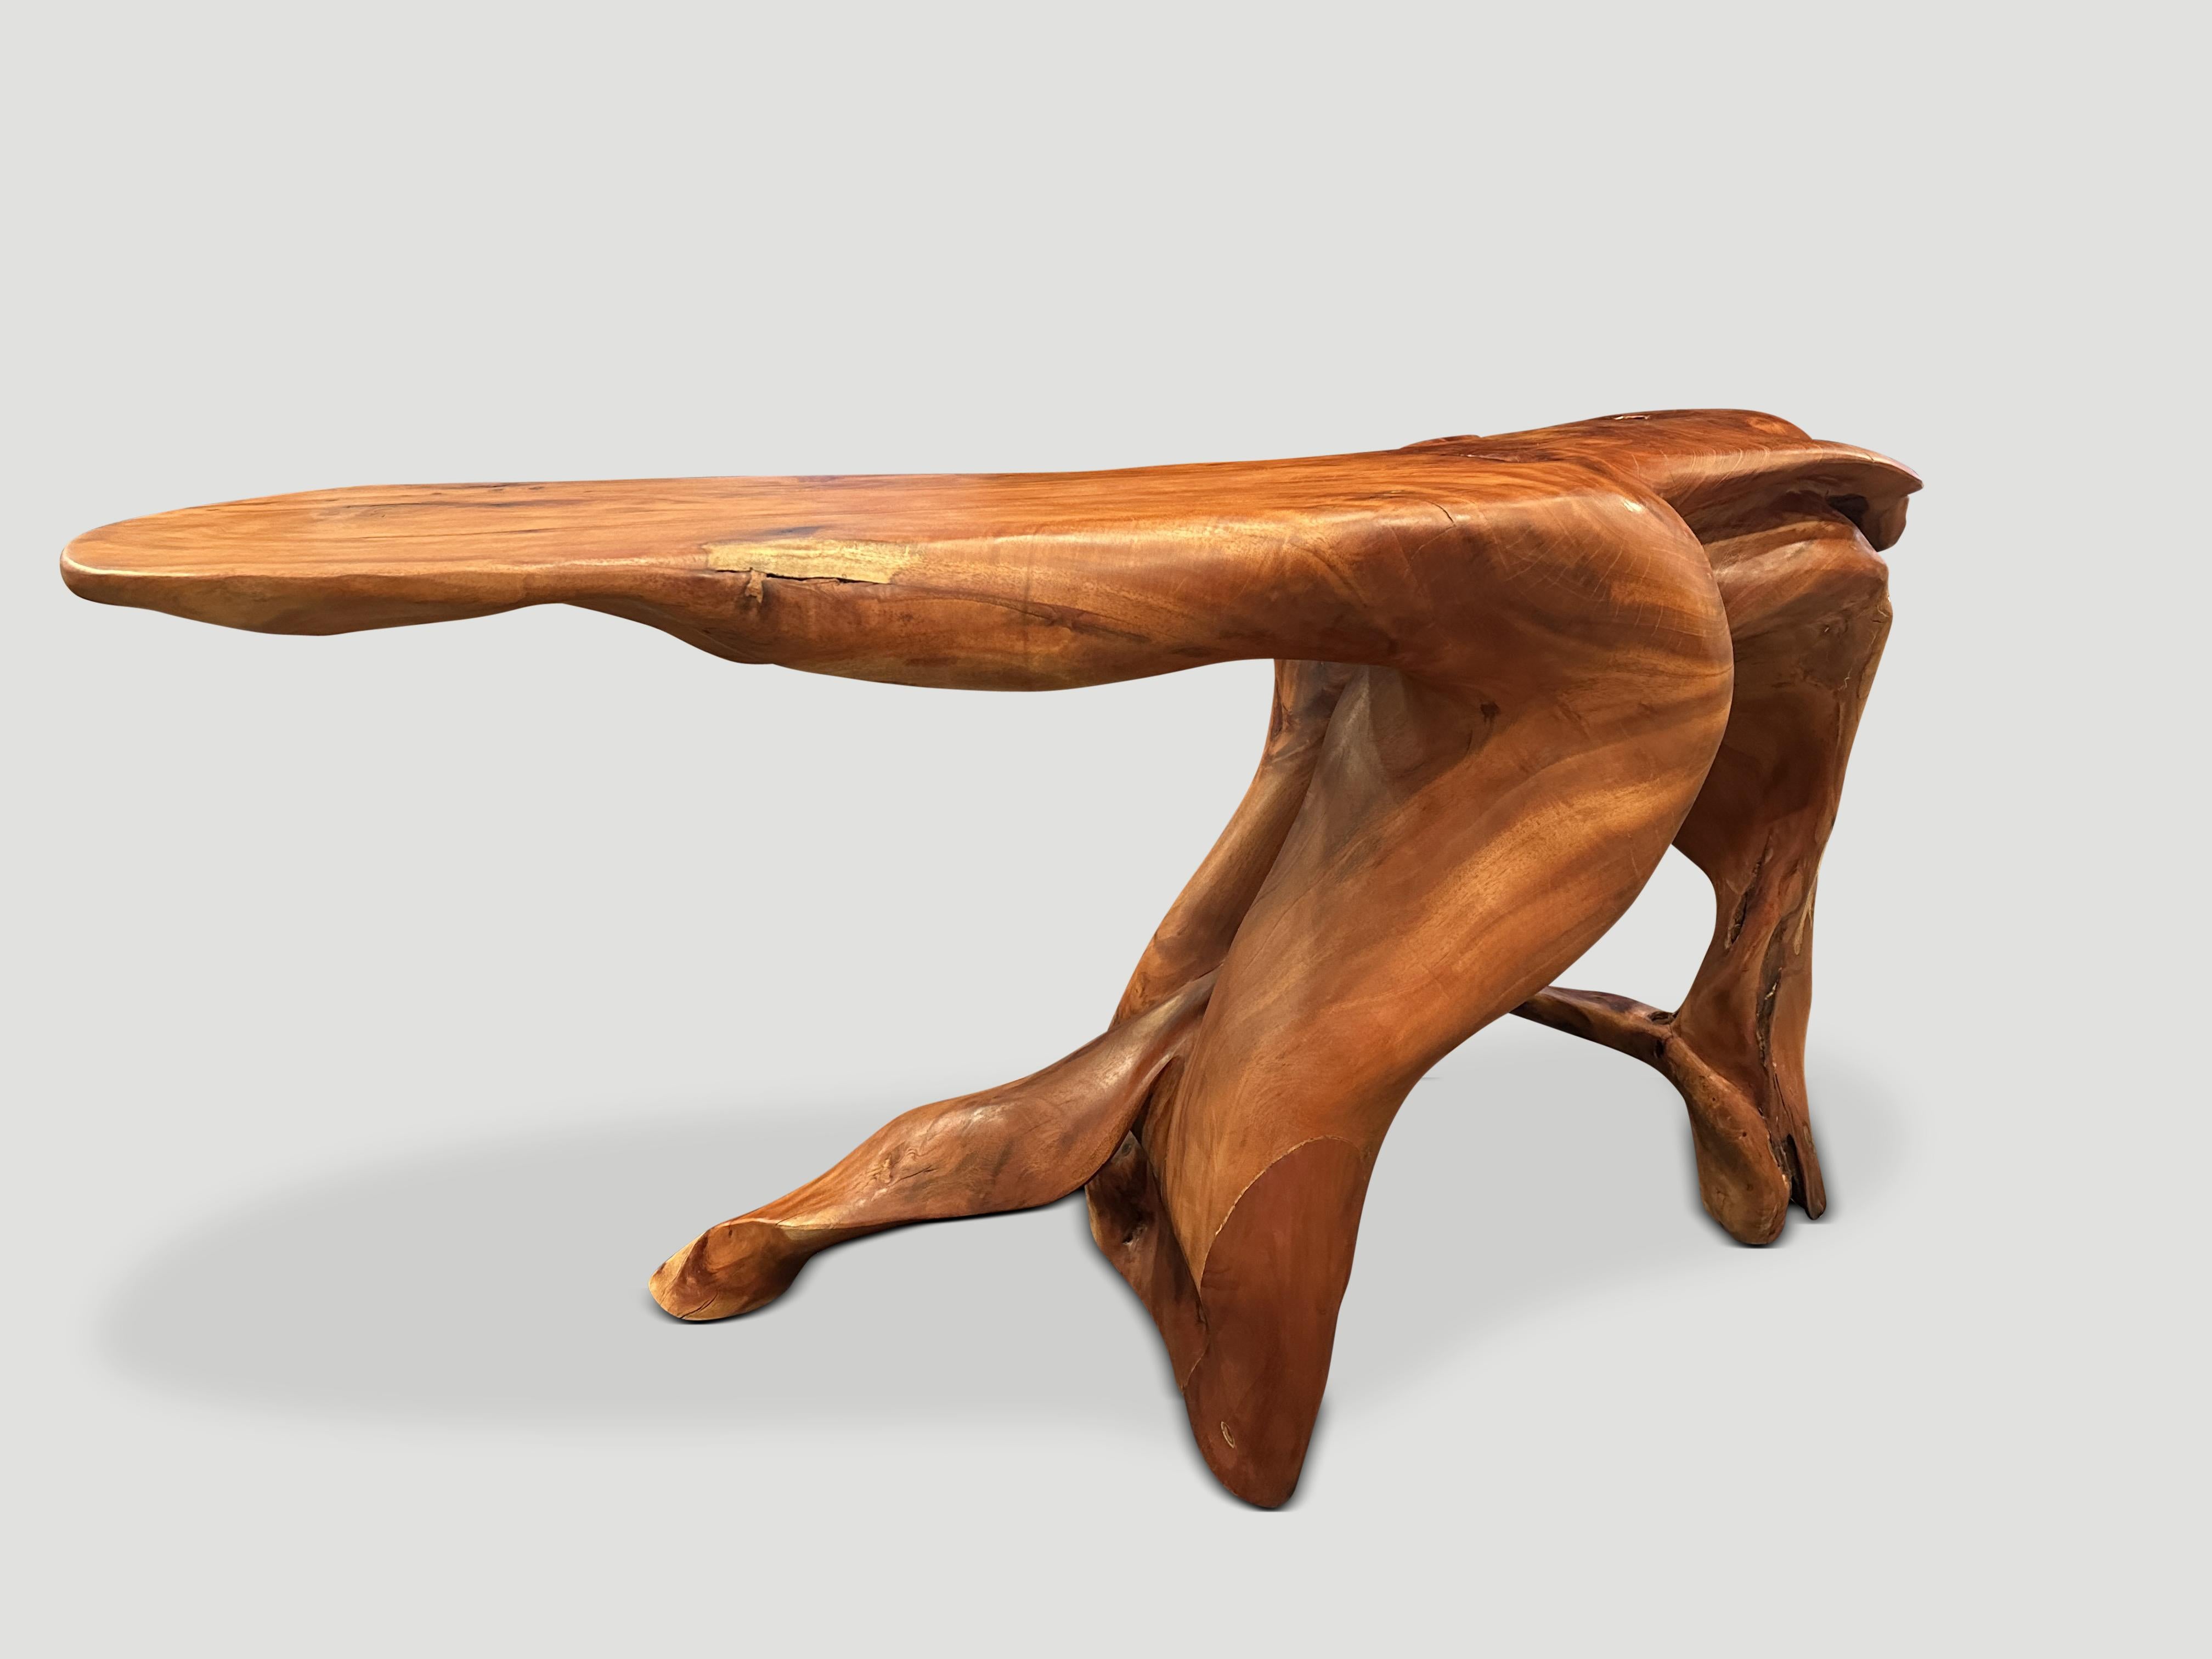 Beautiful reclaimed mahogany wood console table hand carved from a single root. Both sculptural and usable this one of a kind piece is stunning on both sides. We added a natural oil to reveal the impressive wood grain. It’s all in the details. 

Own